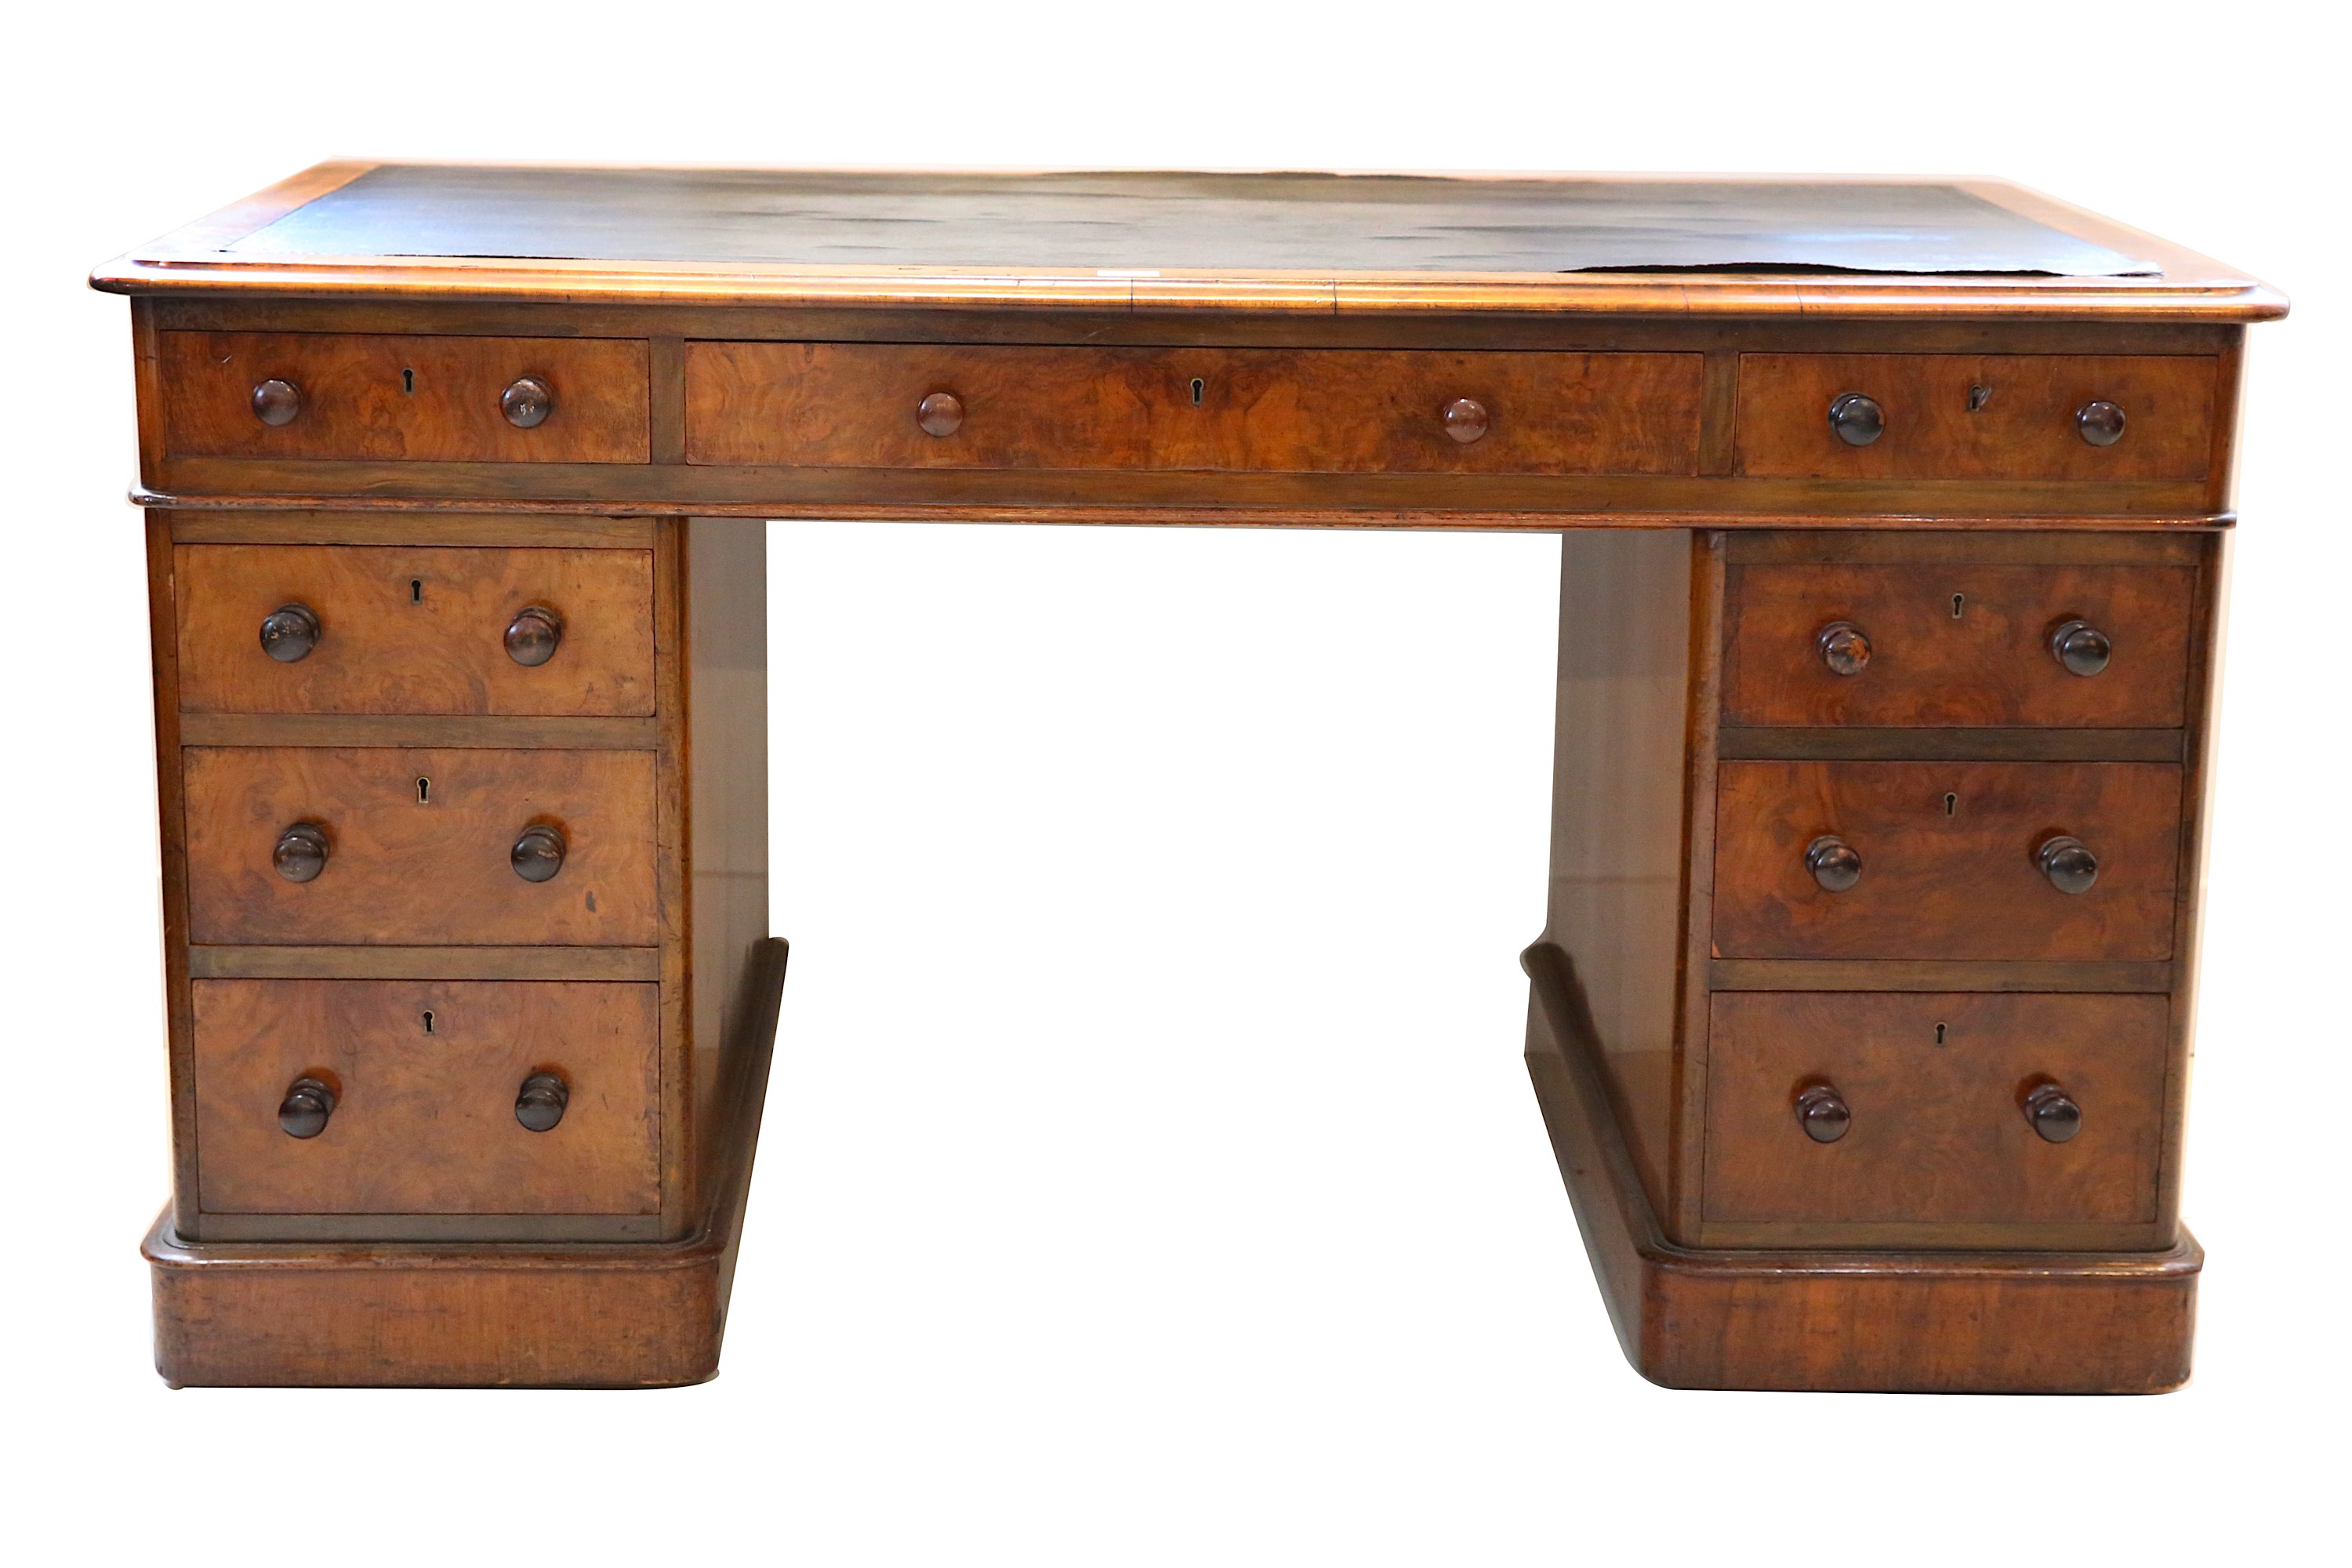 A Victorian figured walnut pedestal desk, with rounded rectangular top over nine drawers, on a